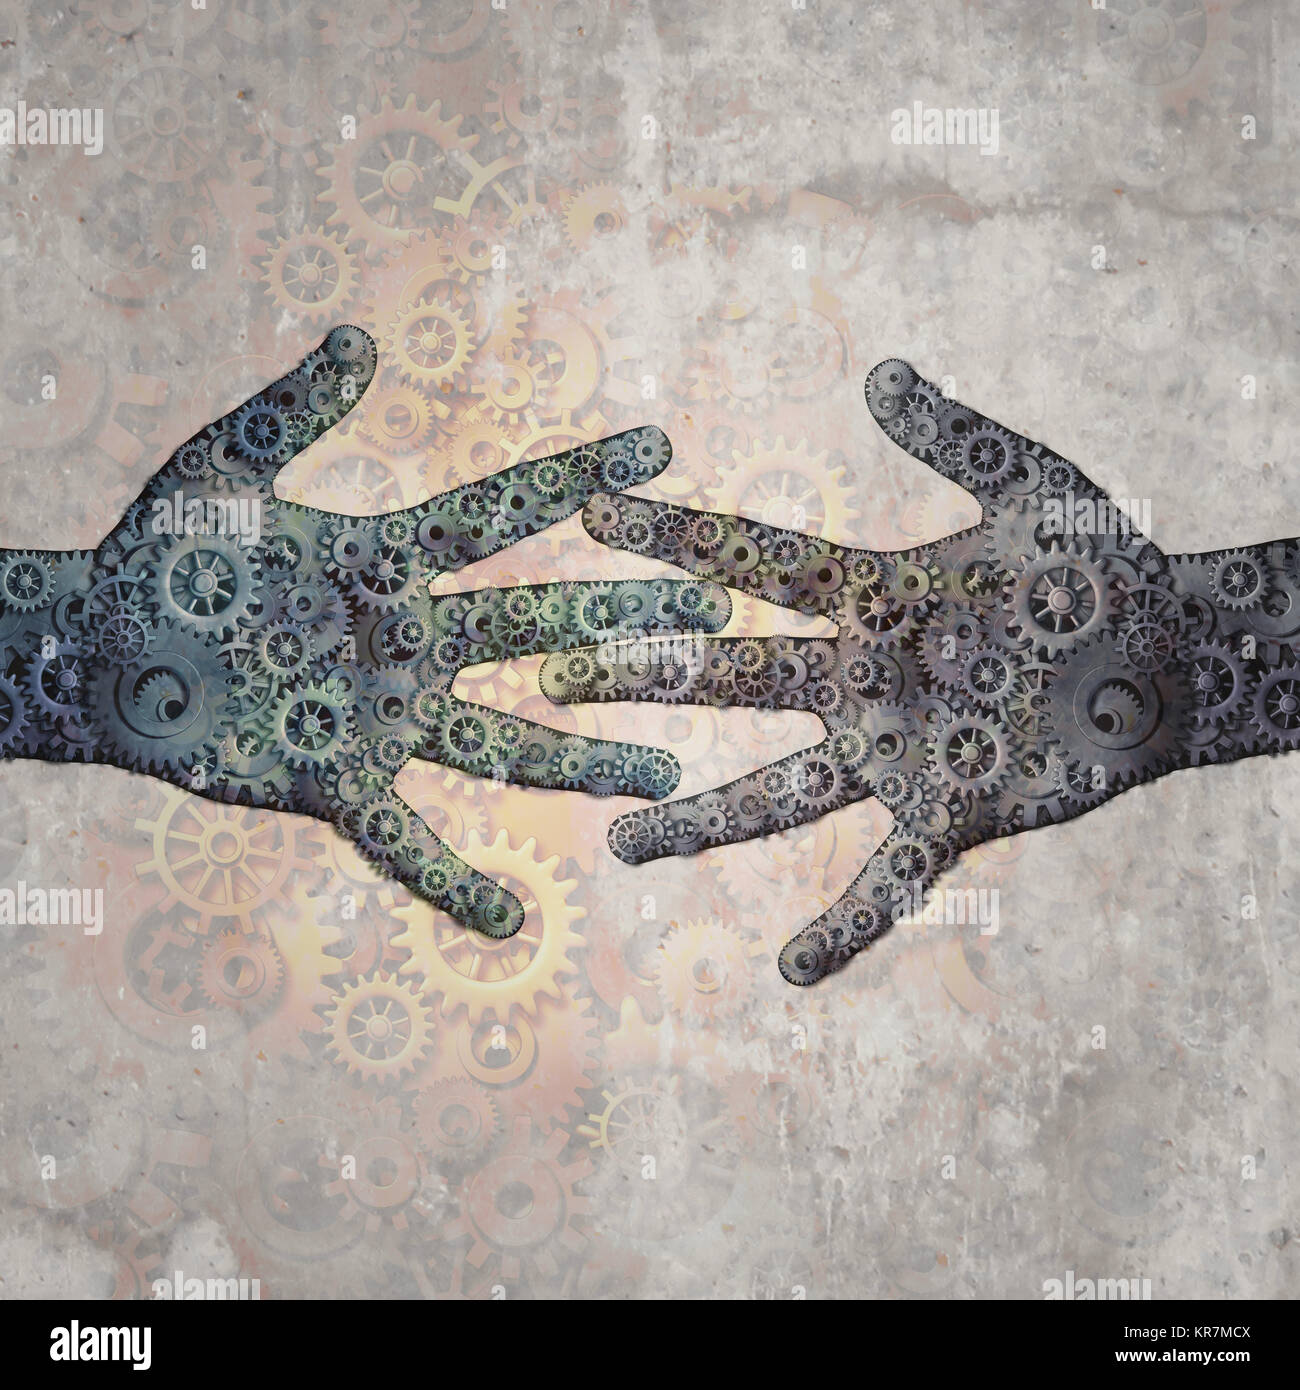 Technology and life conceptual design as a machine learning abstract concept with mechanical robotic hands made of gears connecting together. Stock Photo